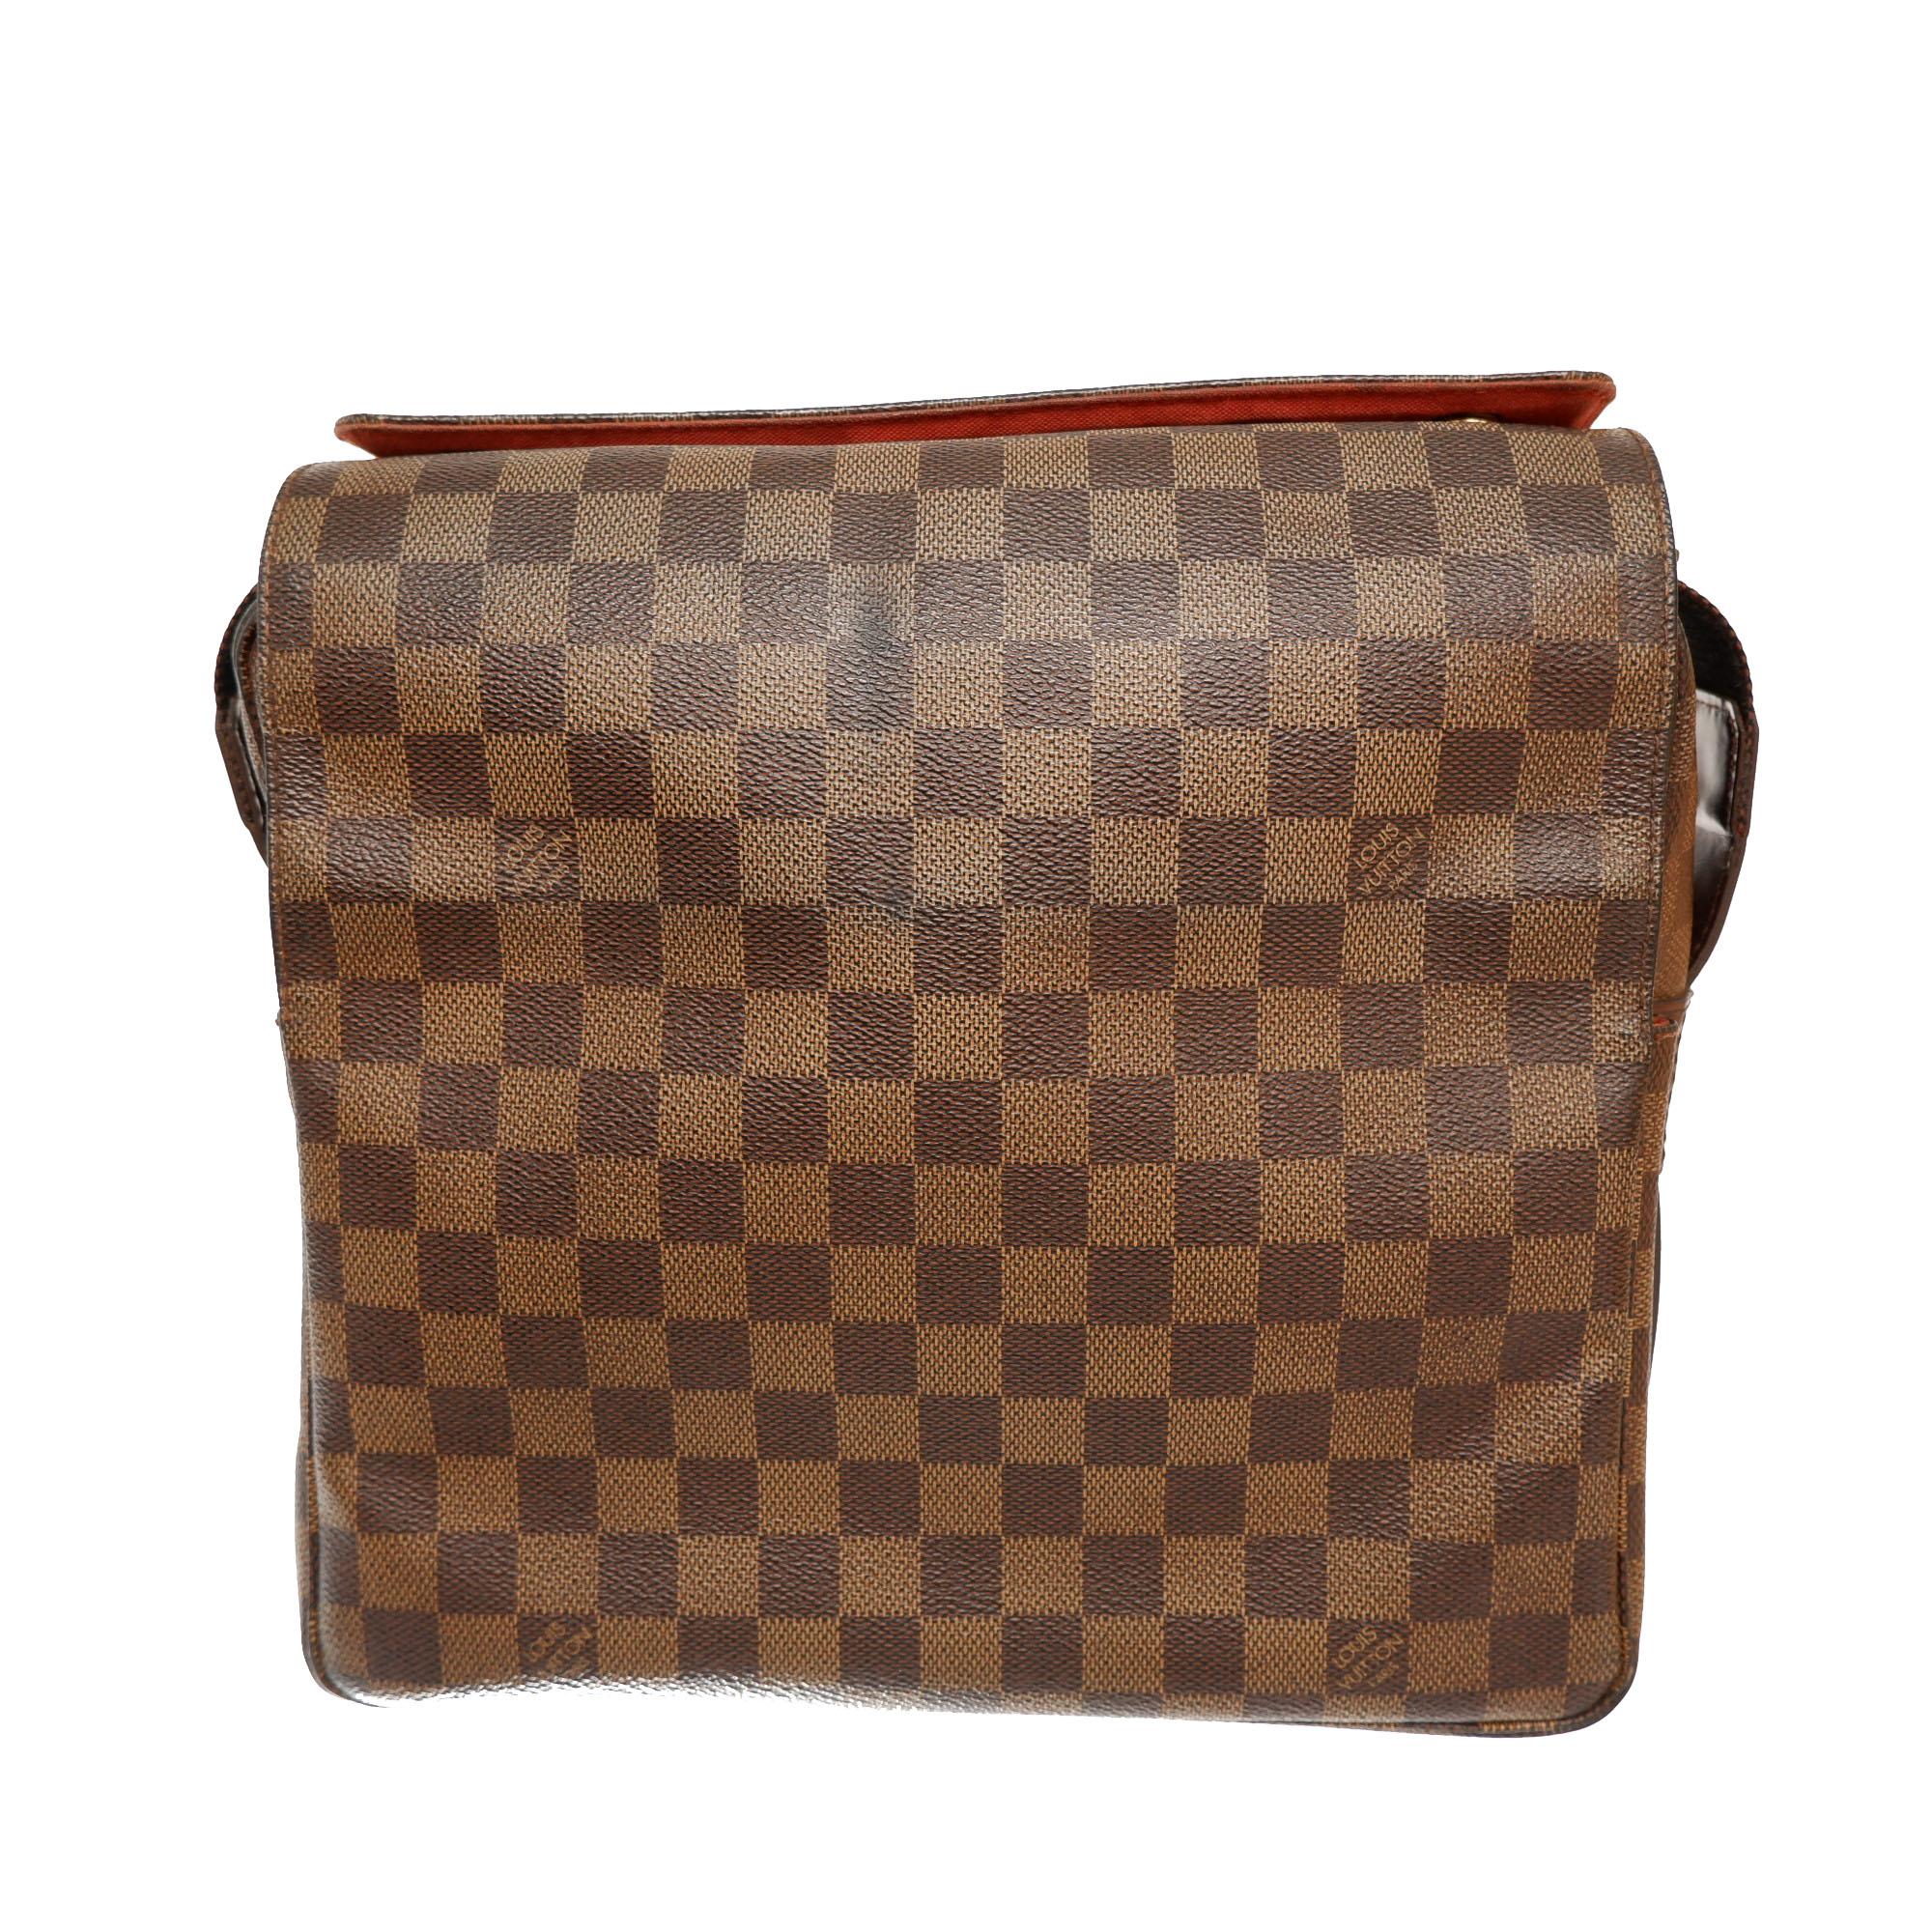 Brown and tan Damier Ebene coated canvas Louis Vuitton Naviglio messenger bag with gold-tone hardware, walnut leather trim, single adjustable flat shoulder strap, three interior compartments; one with zip closure, red woven lining, single slip